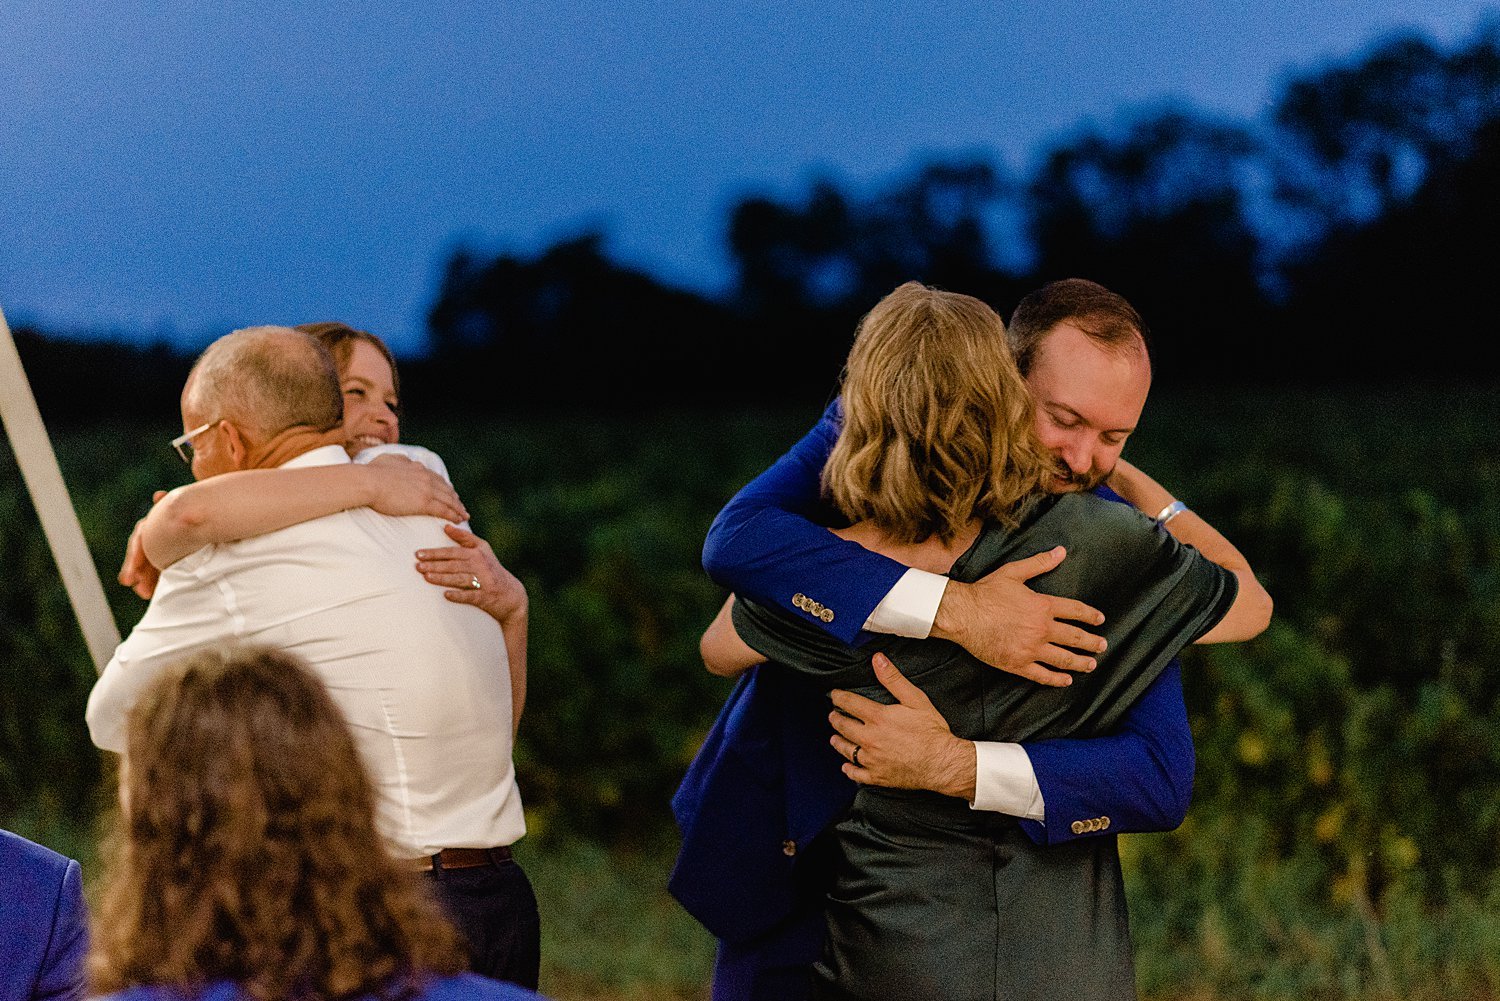 Large Wedding at The Old Third Winery | Prince Edward County Wedding Photographer | Holly McMurter Photographs_0187.jpg